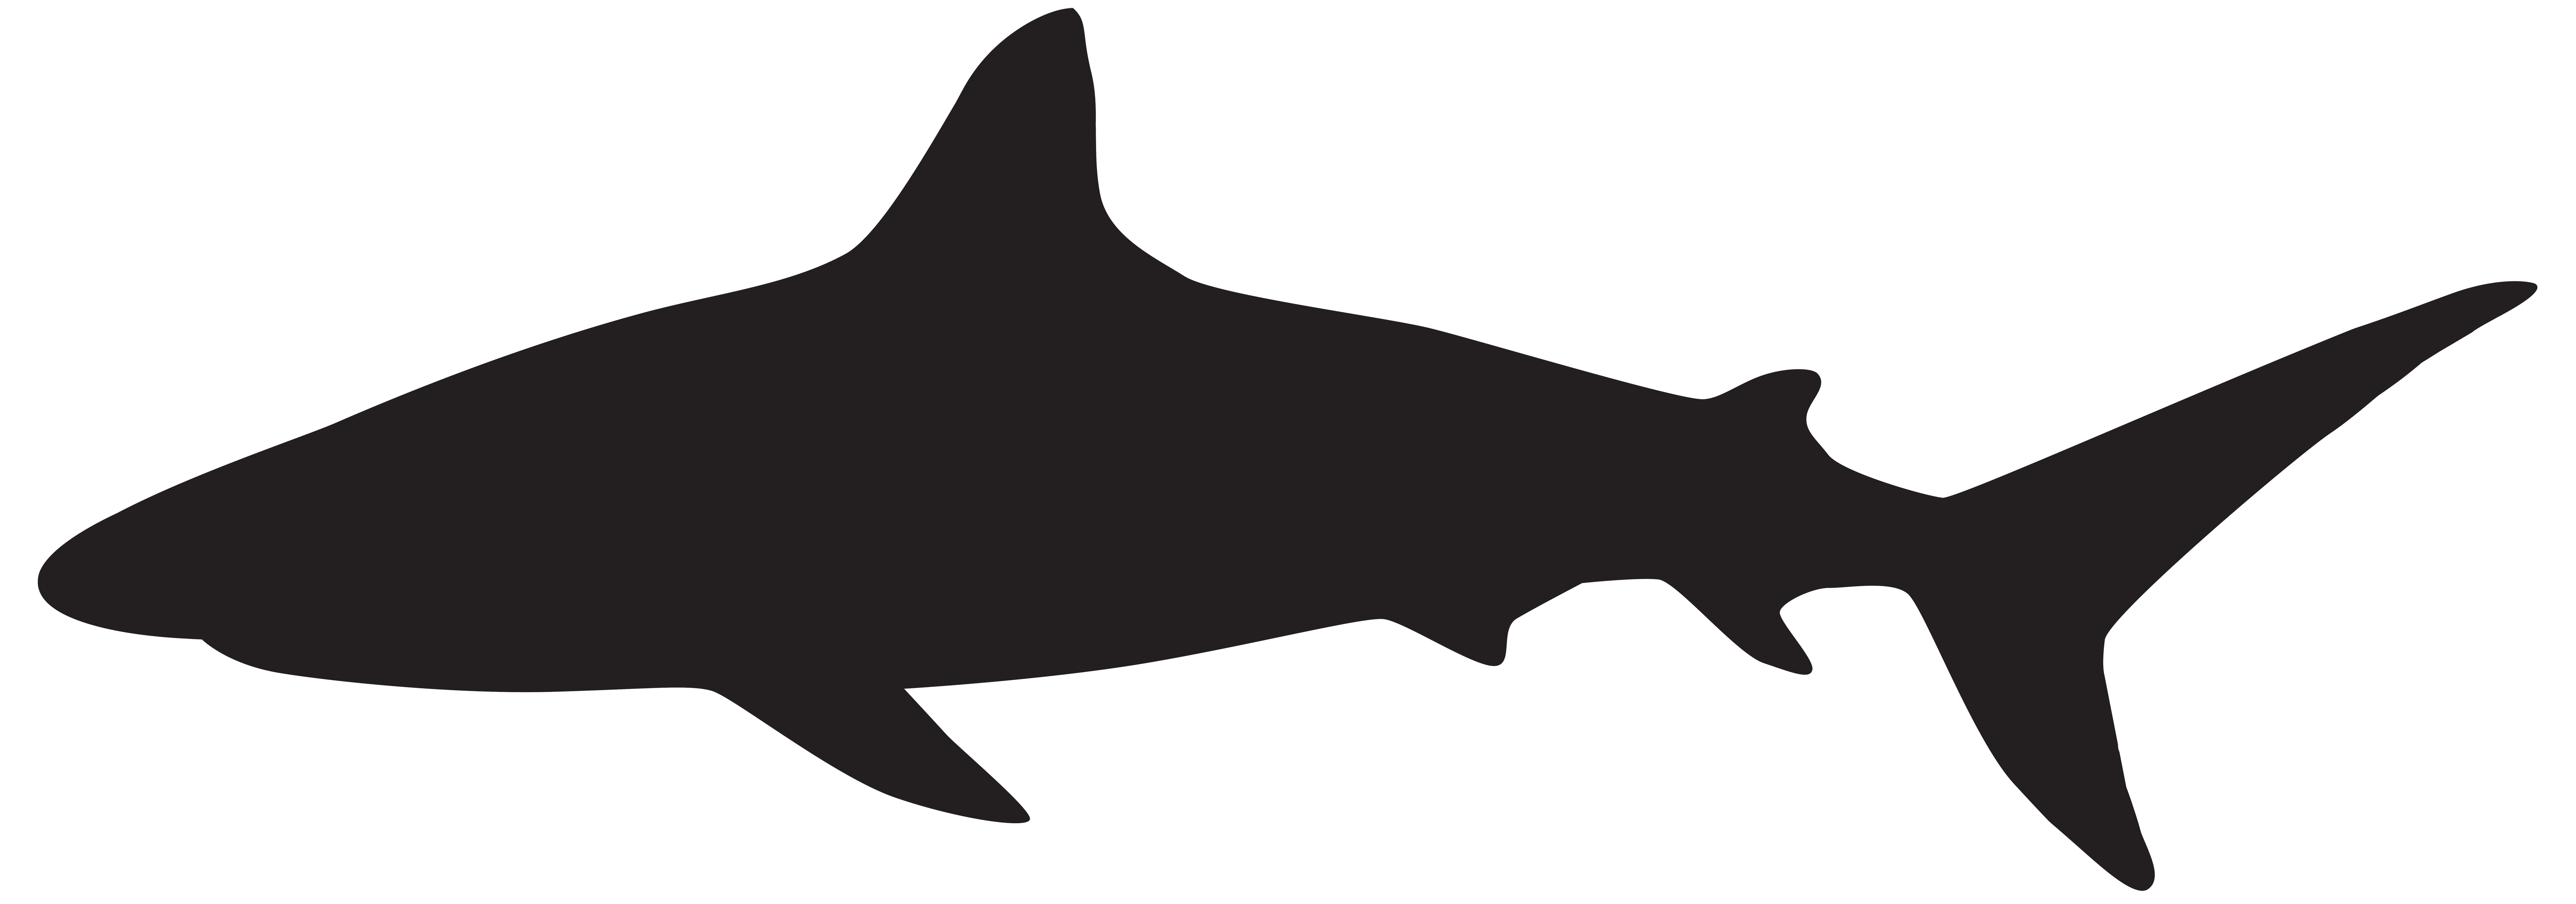 Great white shark Silhouette Clip art - sharks png download - 8000*2808 ...